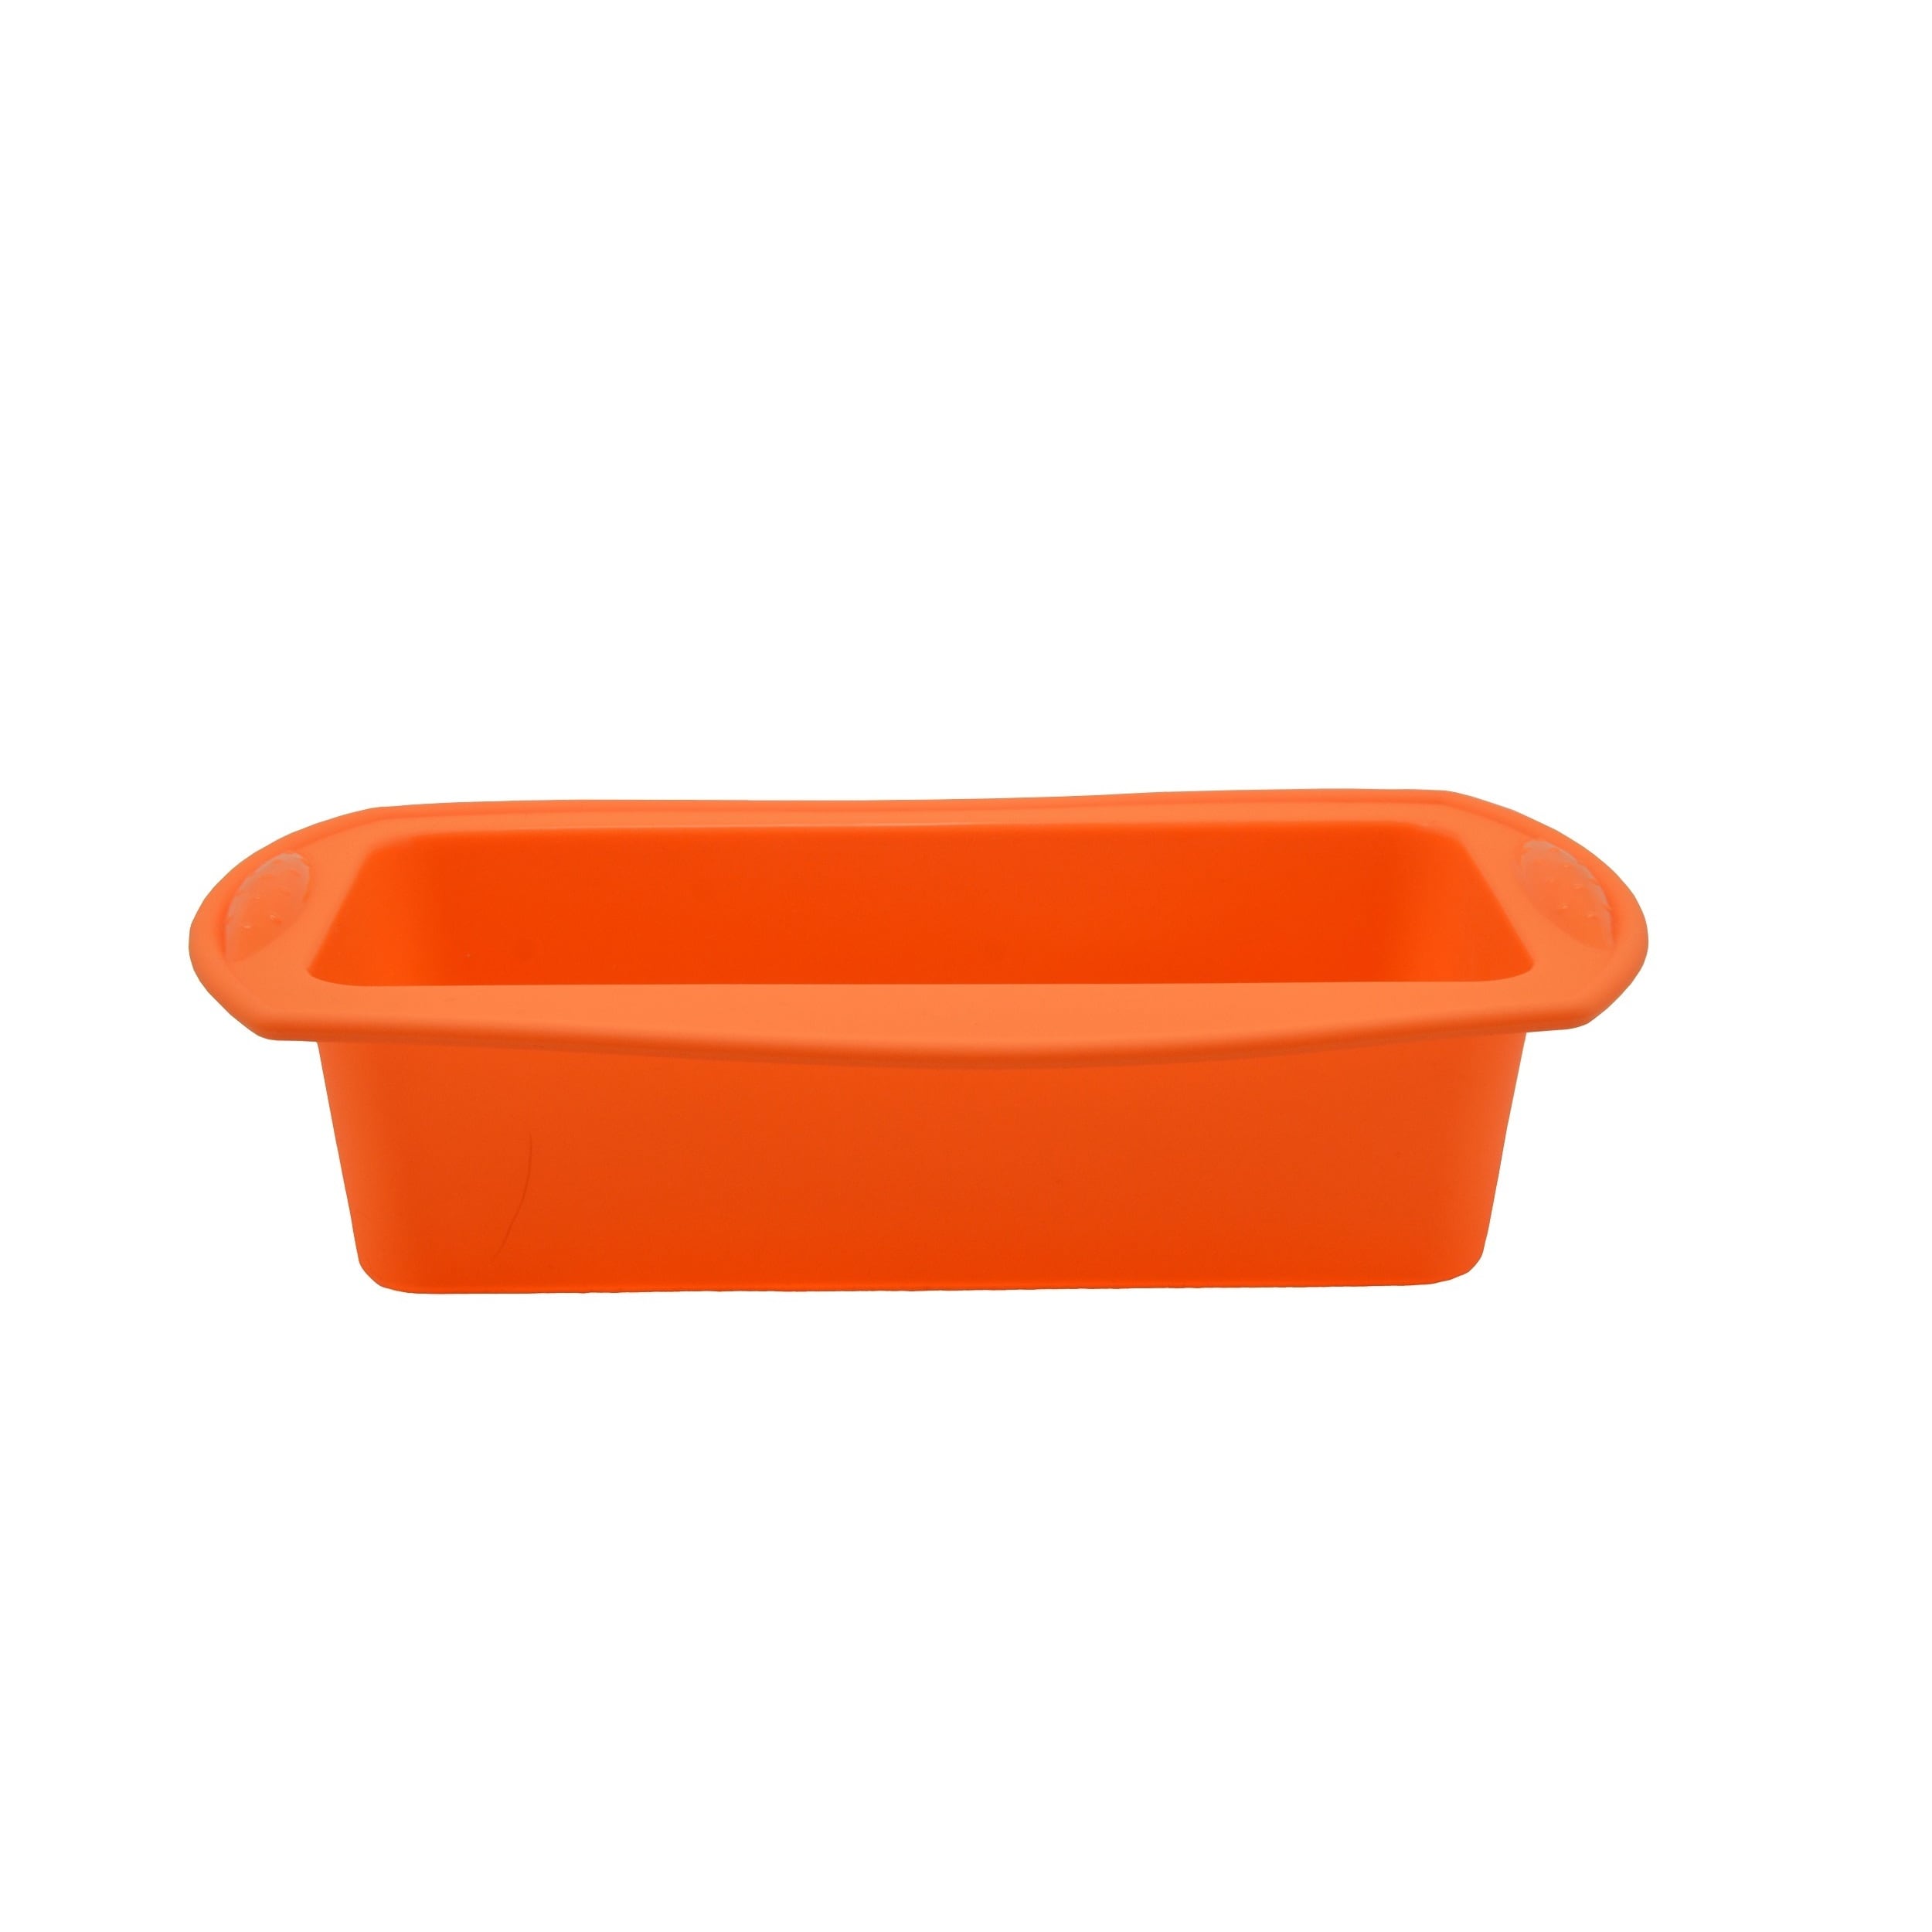 https://ak1.ostkcdn.com/images/products/12635773/Prime-Cook-Silicone-Rectangular-Cake-Loaf-Pan-7acfdc68-3506-45a4-b5f9-db88e8d59f62.jpg